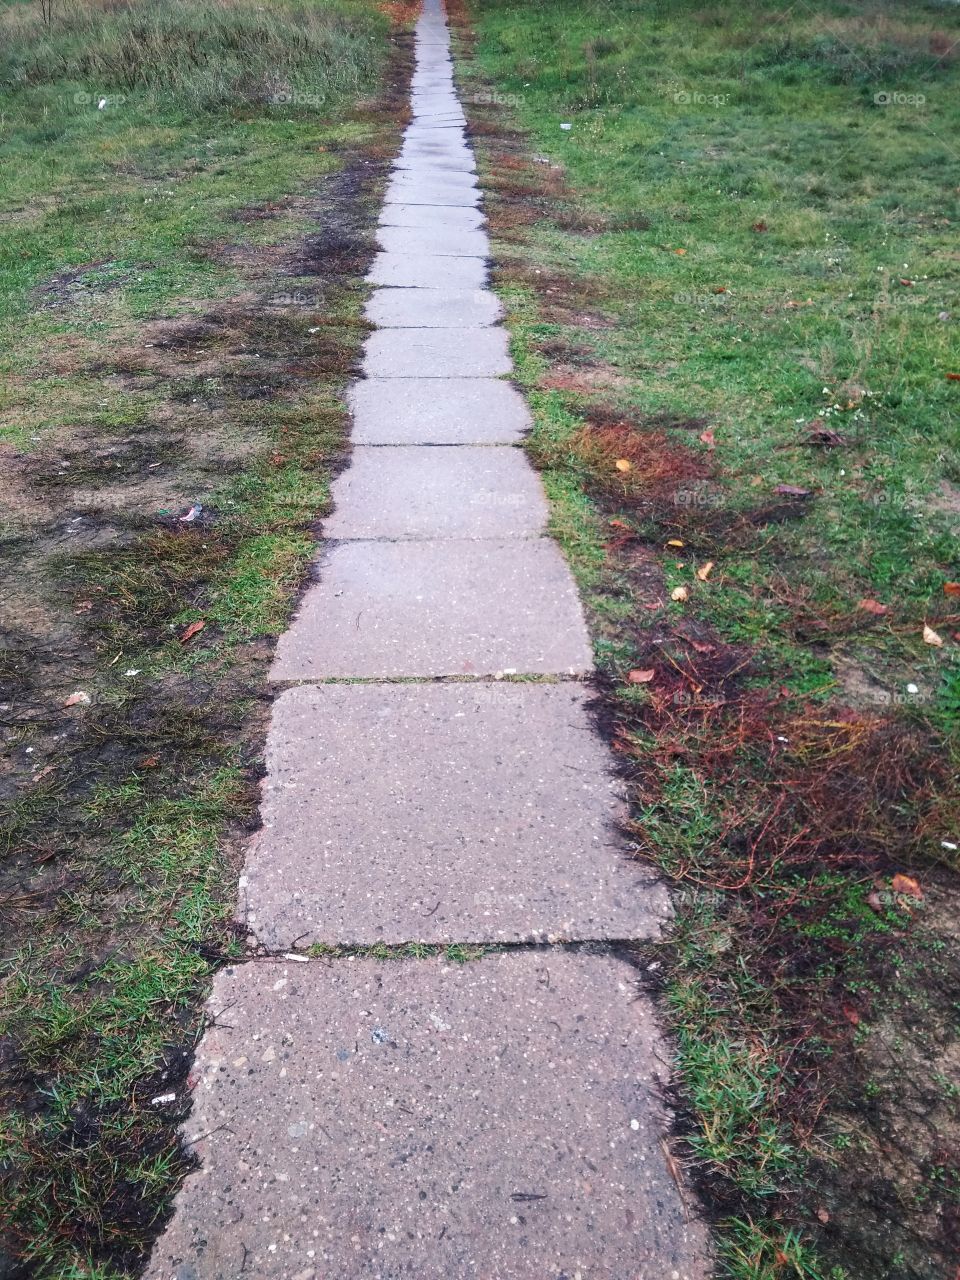 Old Concrete Tile Road Track On
 The Grass Field